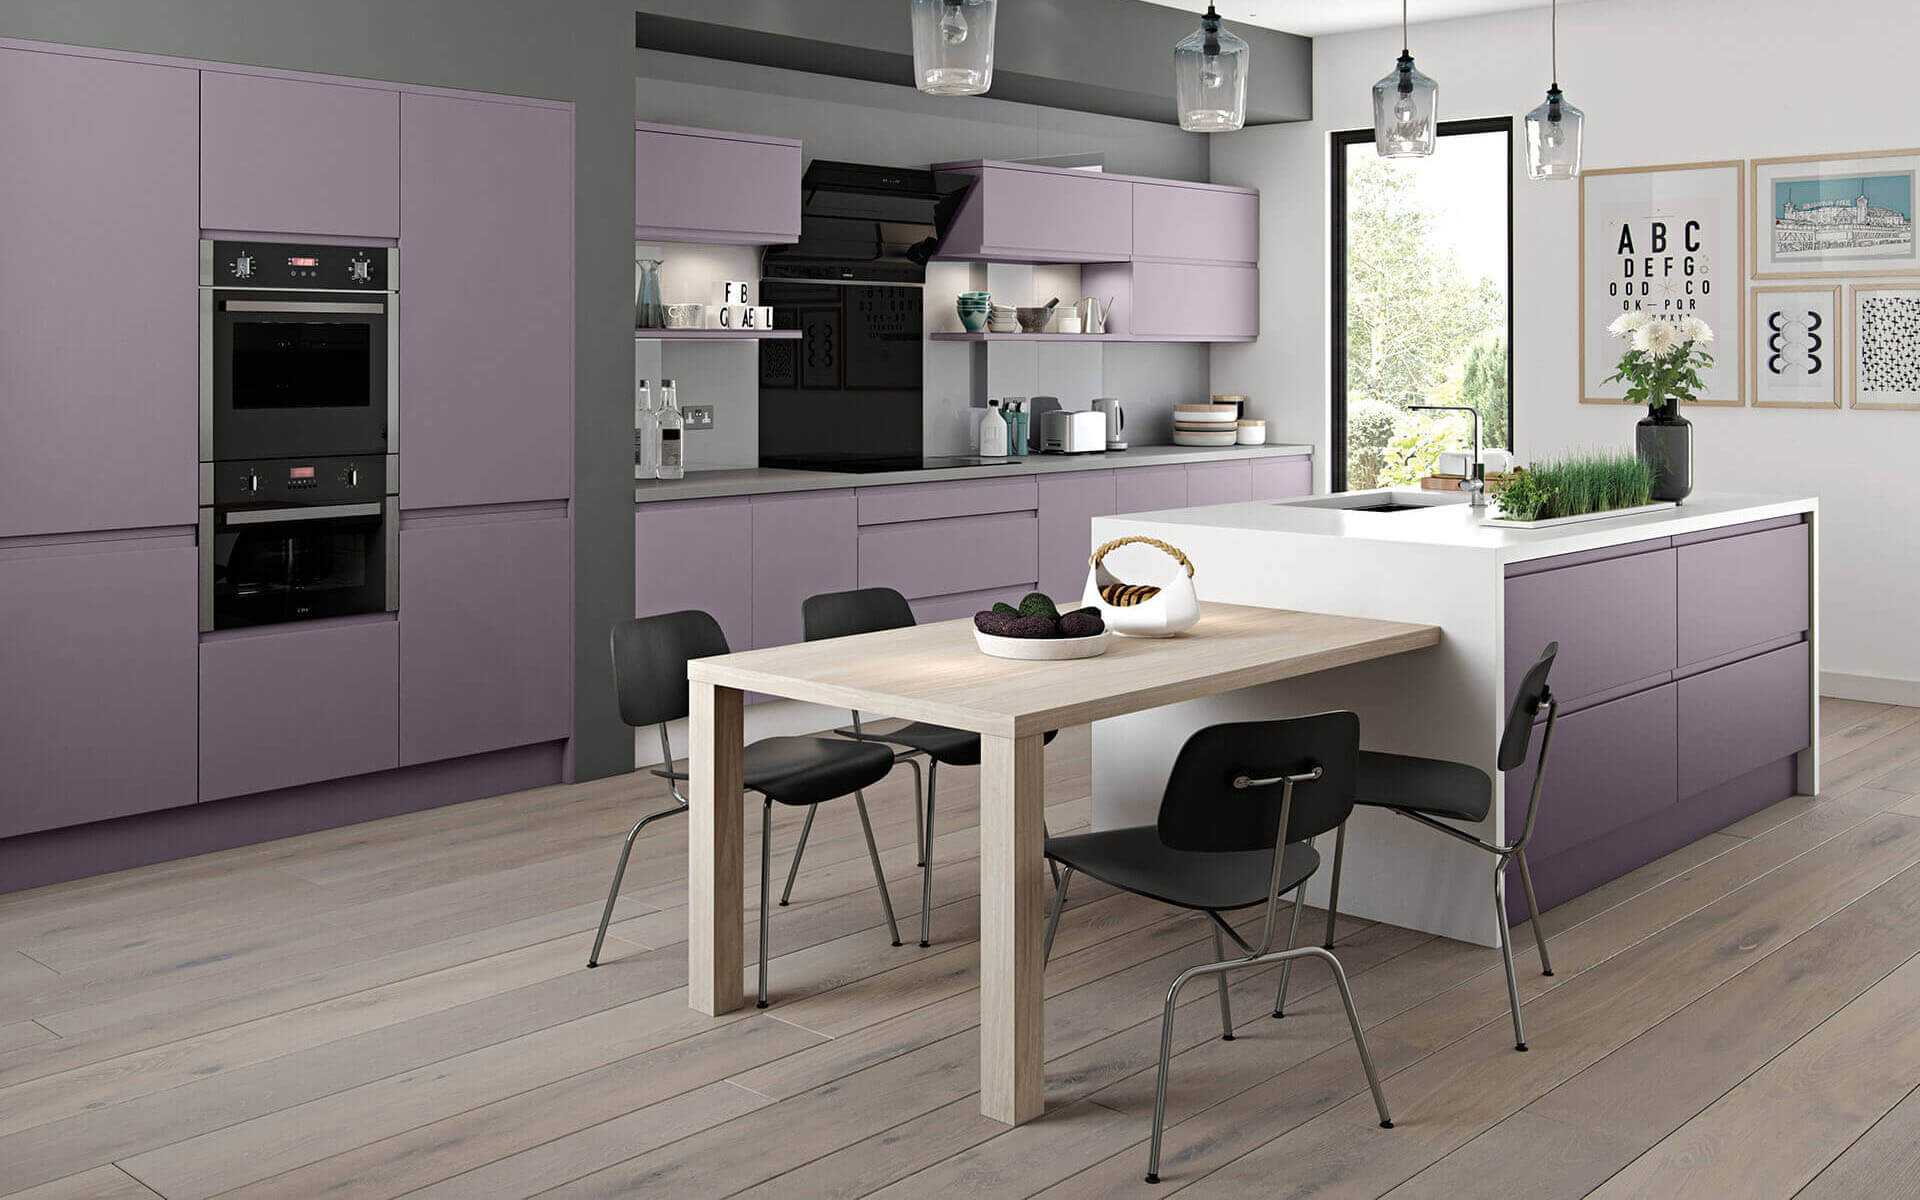 Marino French Lavender Painted J Pull Handleless Kitchen from Better Kitchens